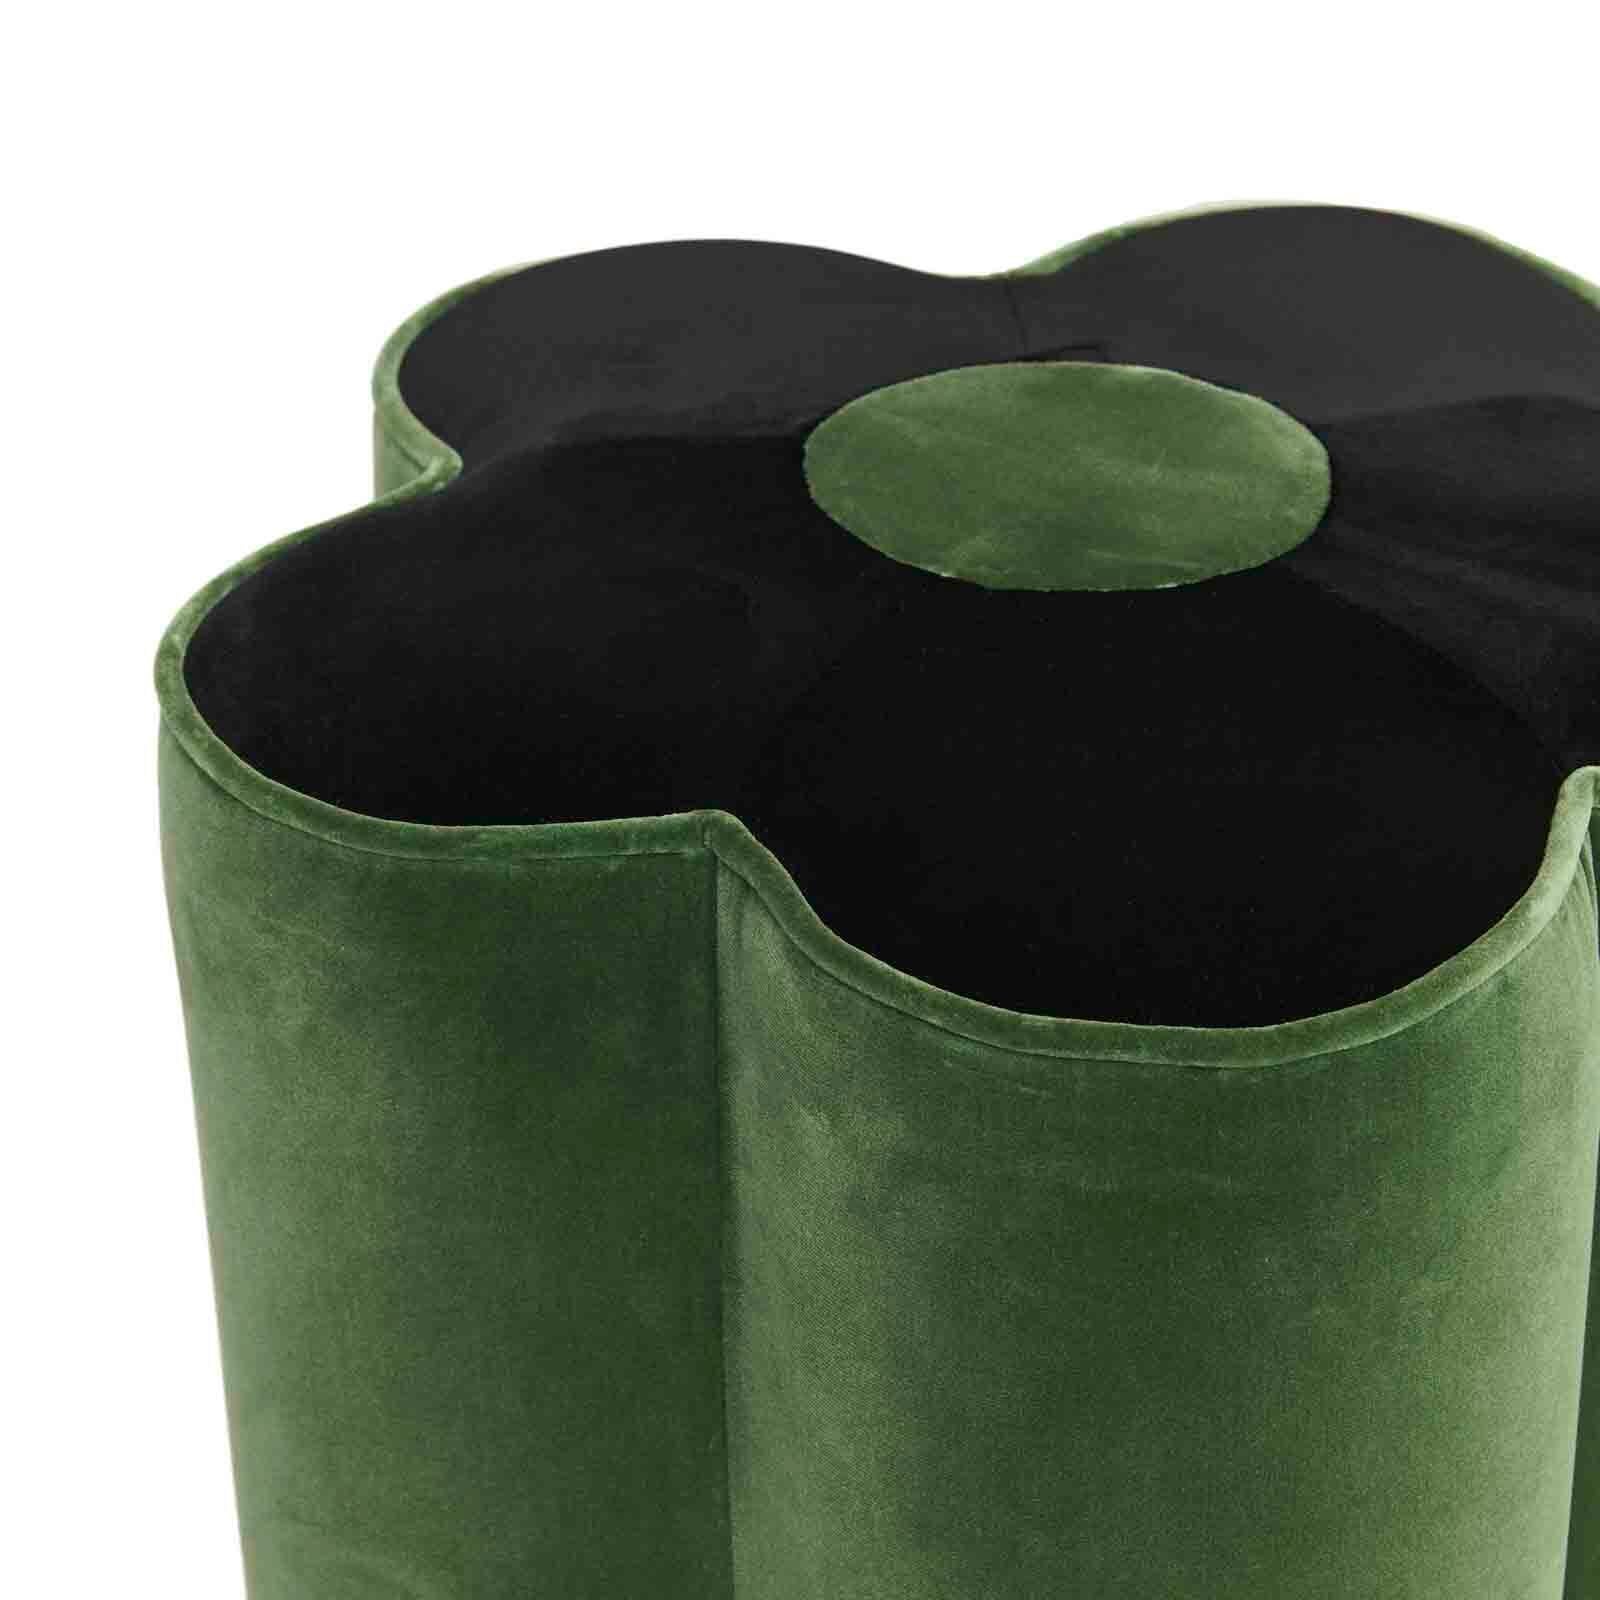 Embrace your inner flower child and give in to FLOWER POWER. In luxurious green and black British-made velvet, this floral-shaped footstool will bring a touch of 1970’s hippie-chic to your home. Crafted by the country’s finest furniture makers,